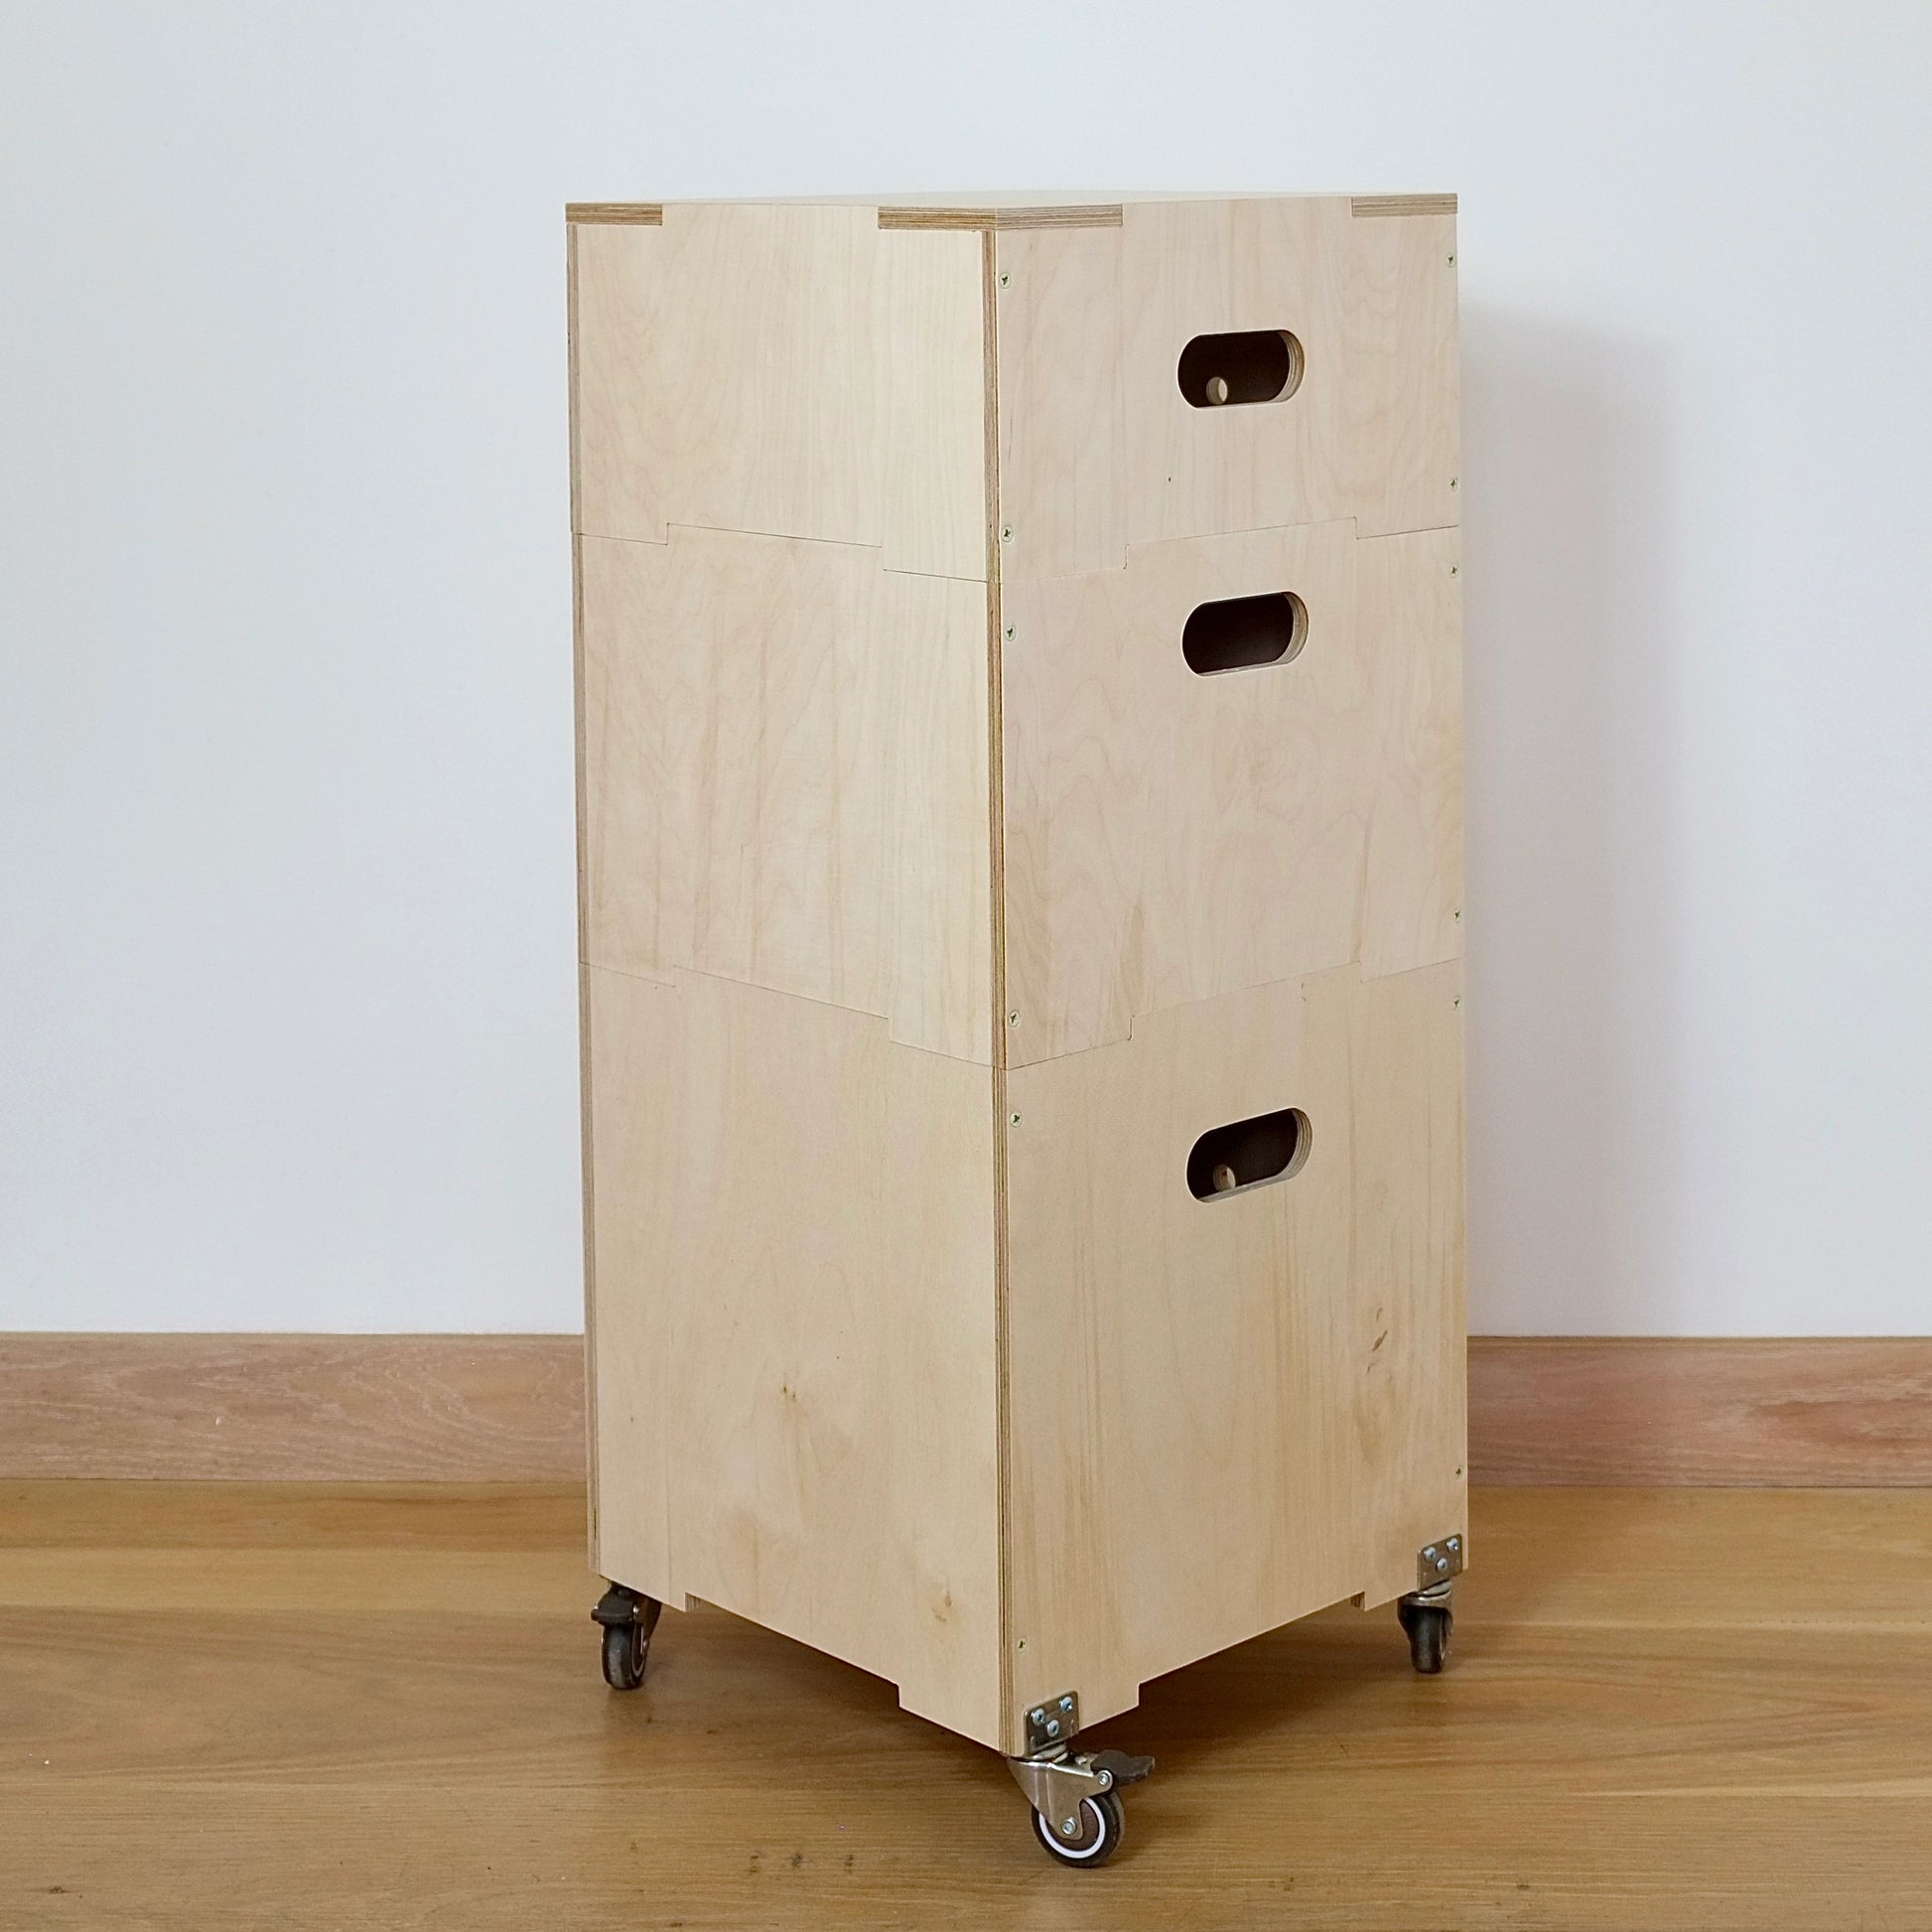 Set of three modern pale wood stackable square crates with hand holes, wooden lid & castors on base sitting on a wooden floor